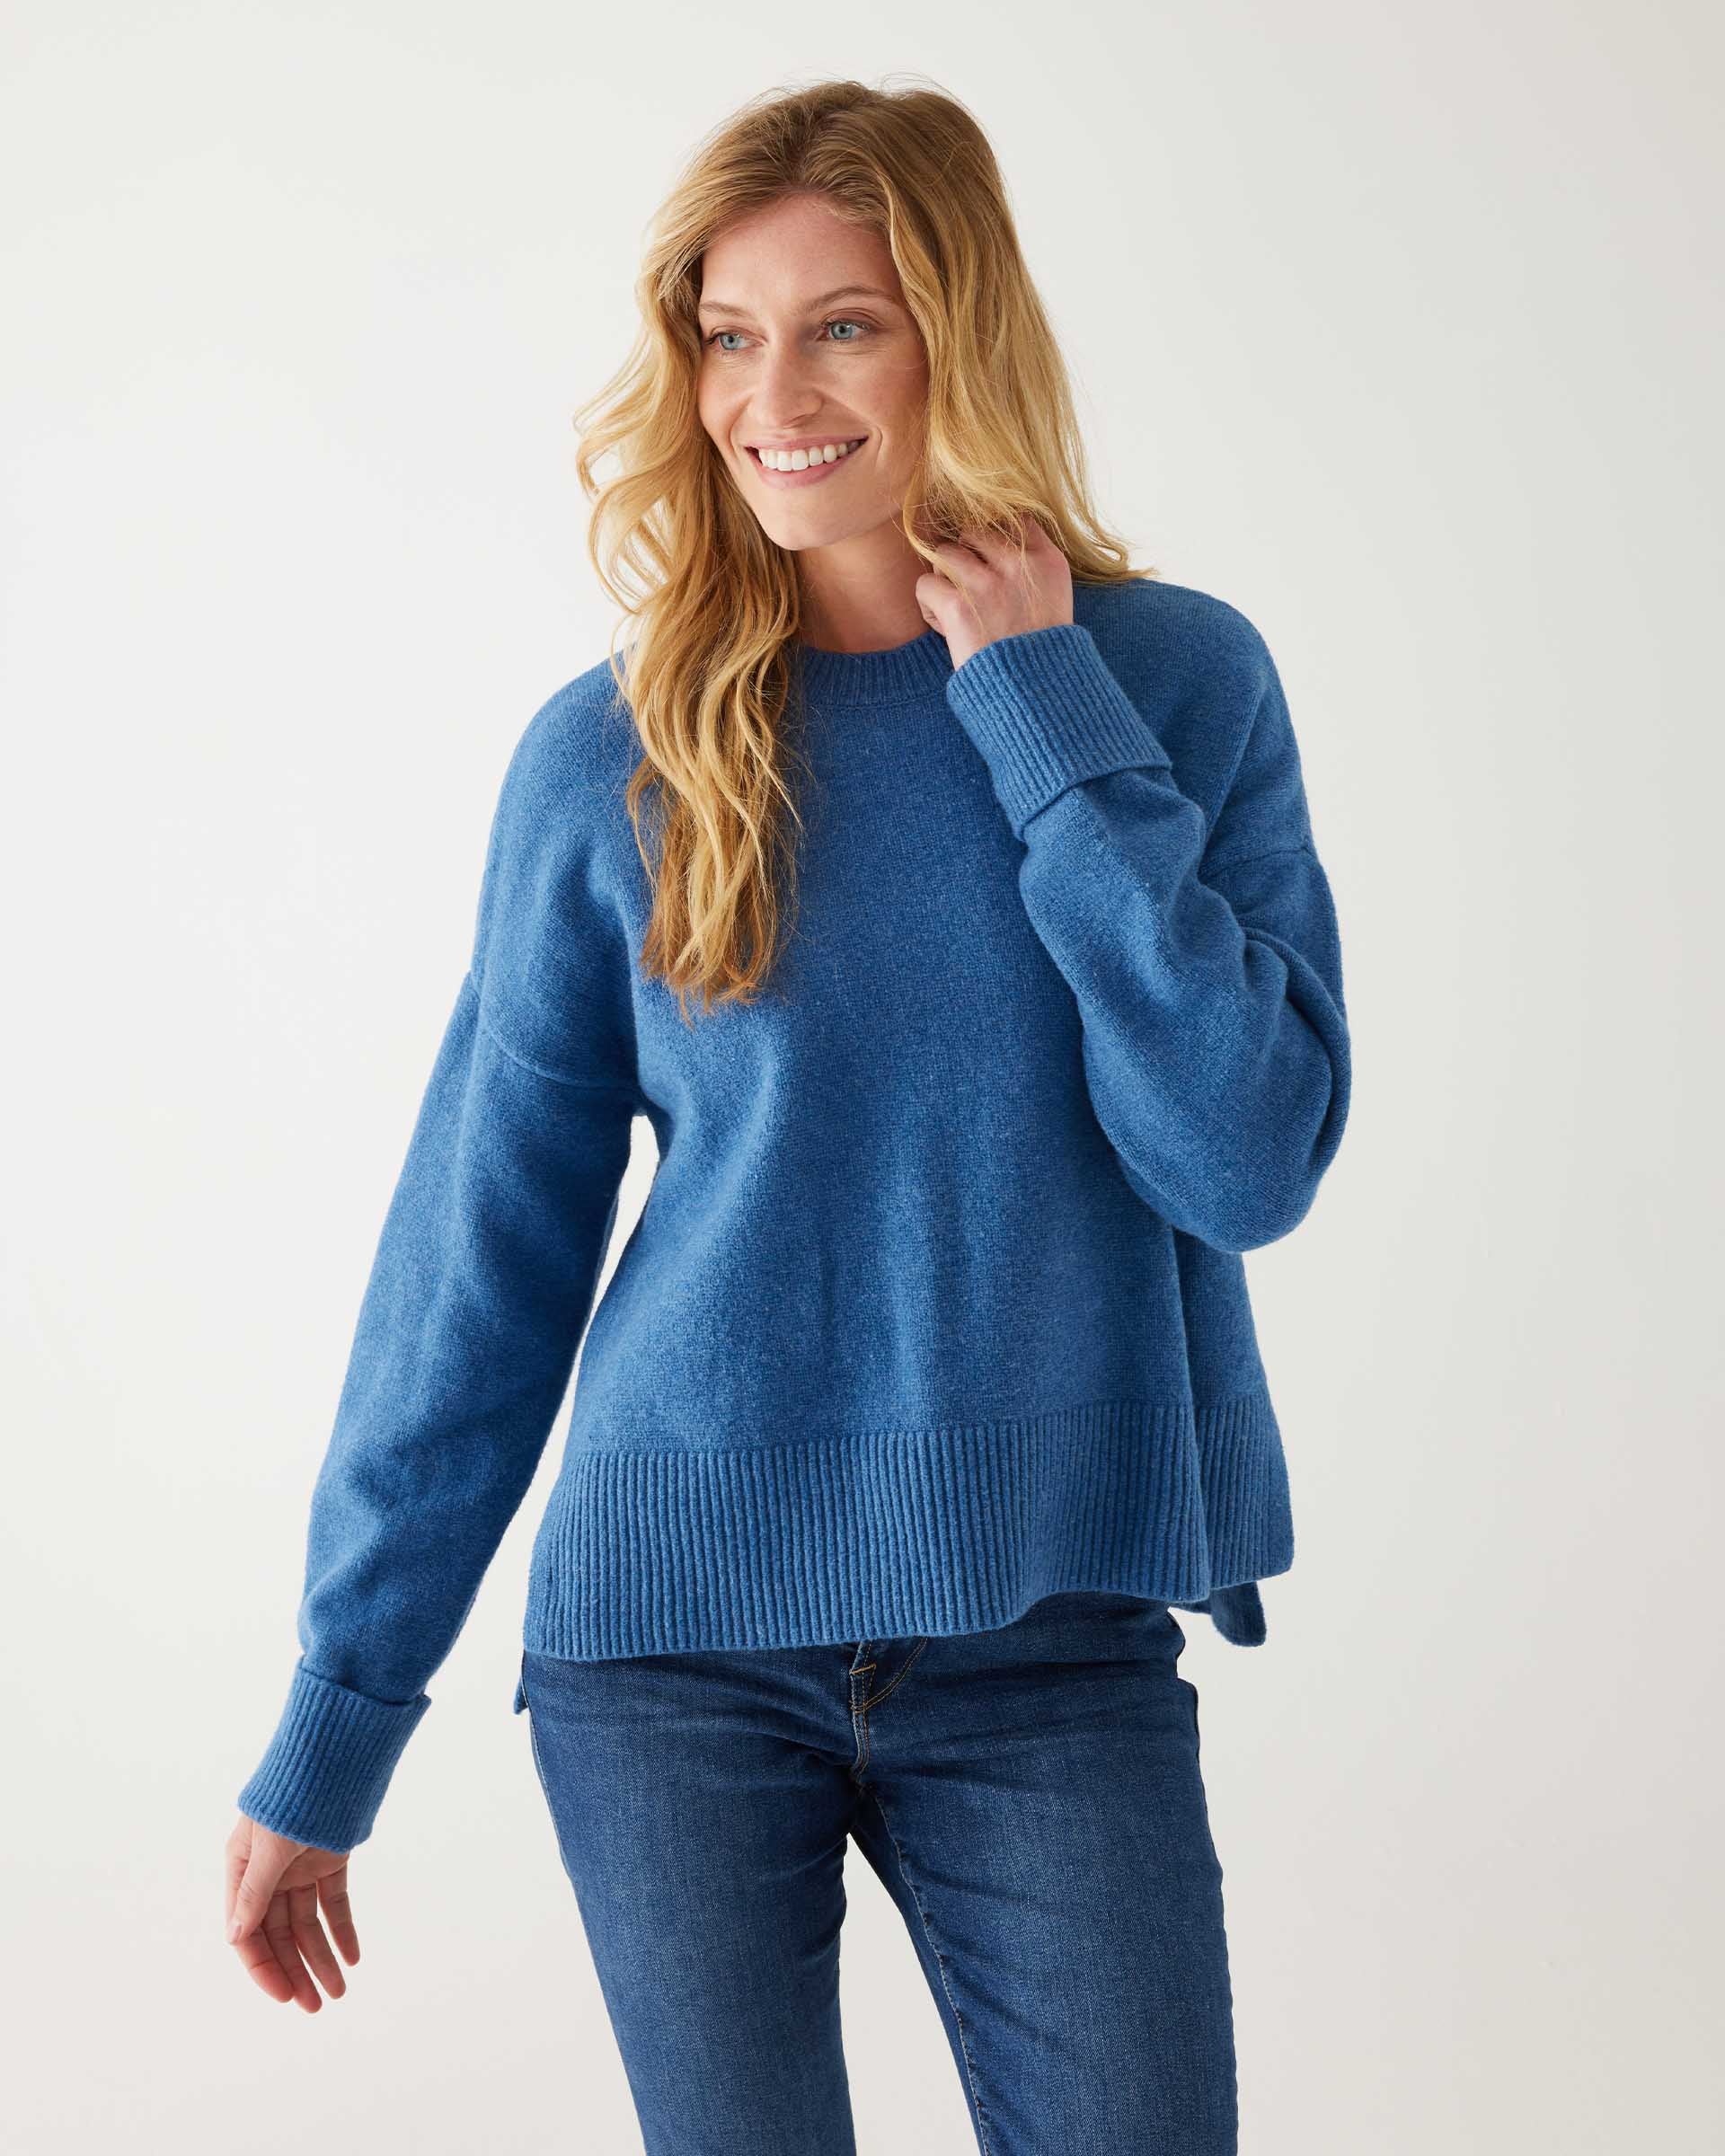 female wearing denim blue crewneck sweater standing in front of a white background